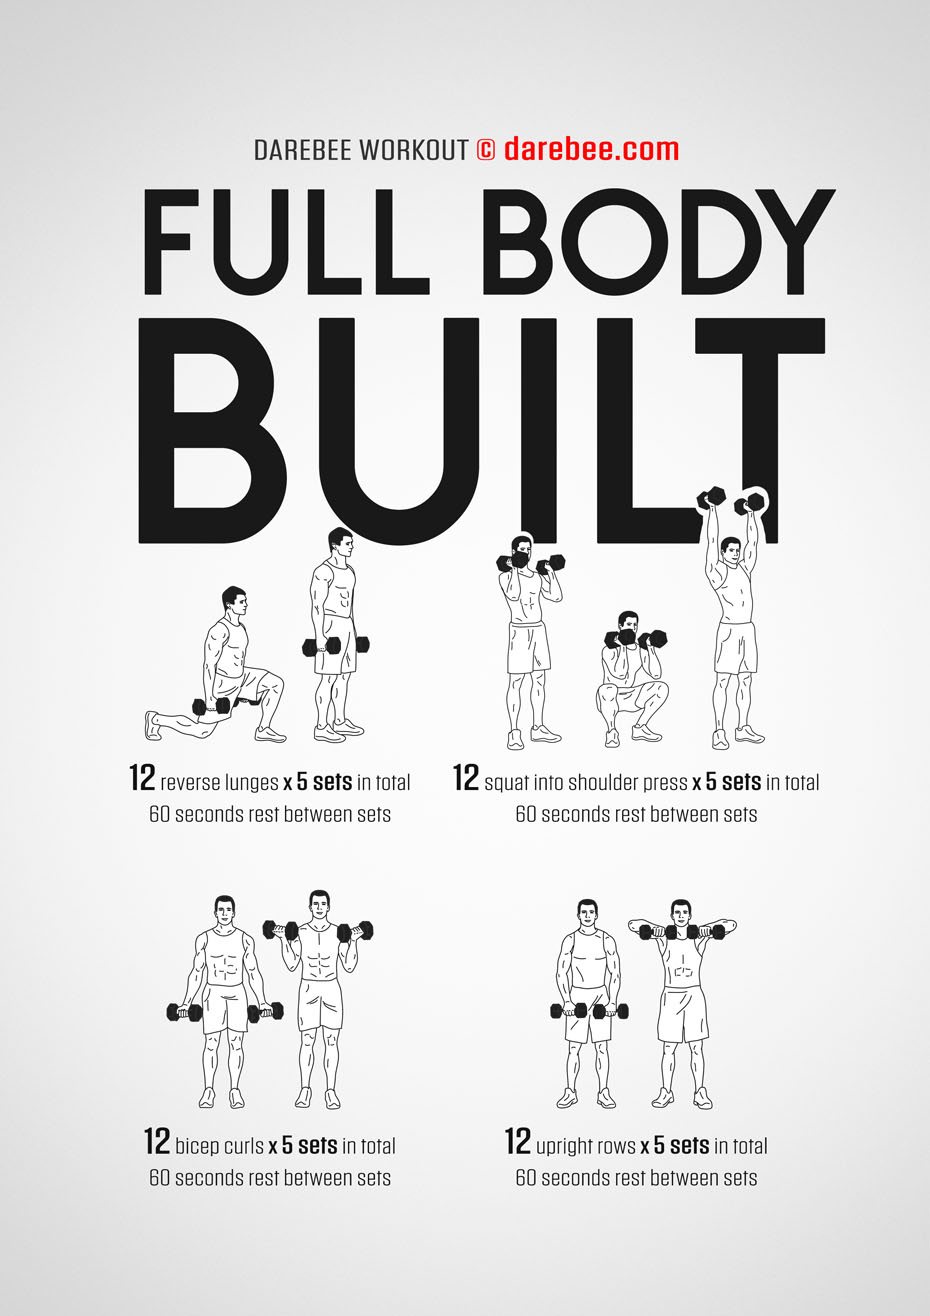 Full Body Built is a dumbbell-based Darebee home fitness strength workout that targets virtually every large muscle group in the body to help you develop total body strength.